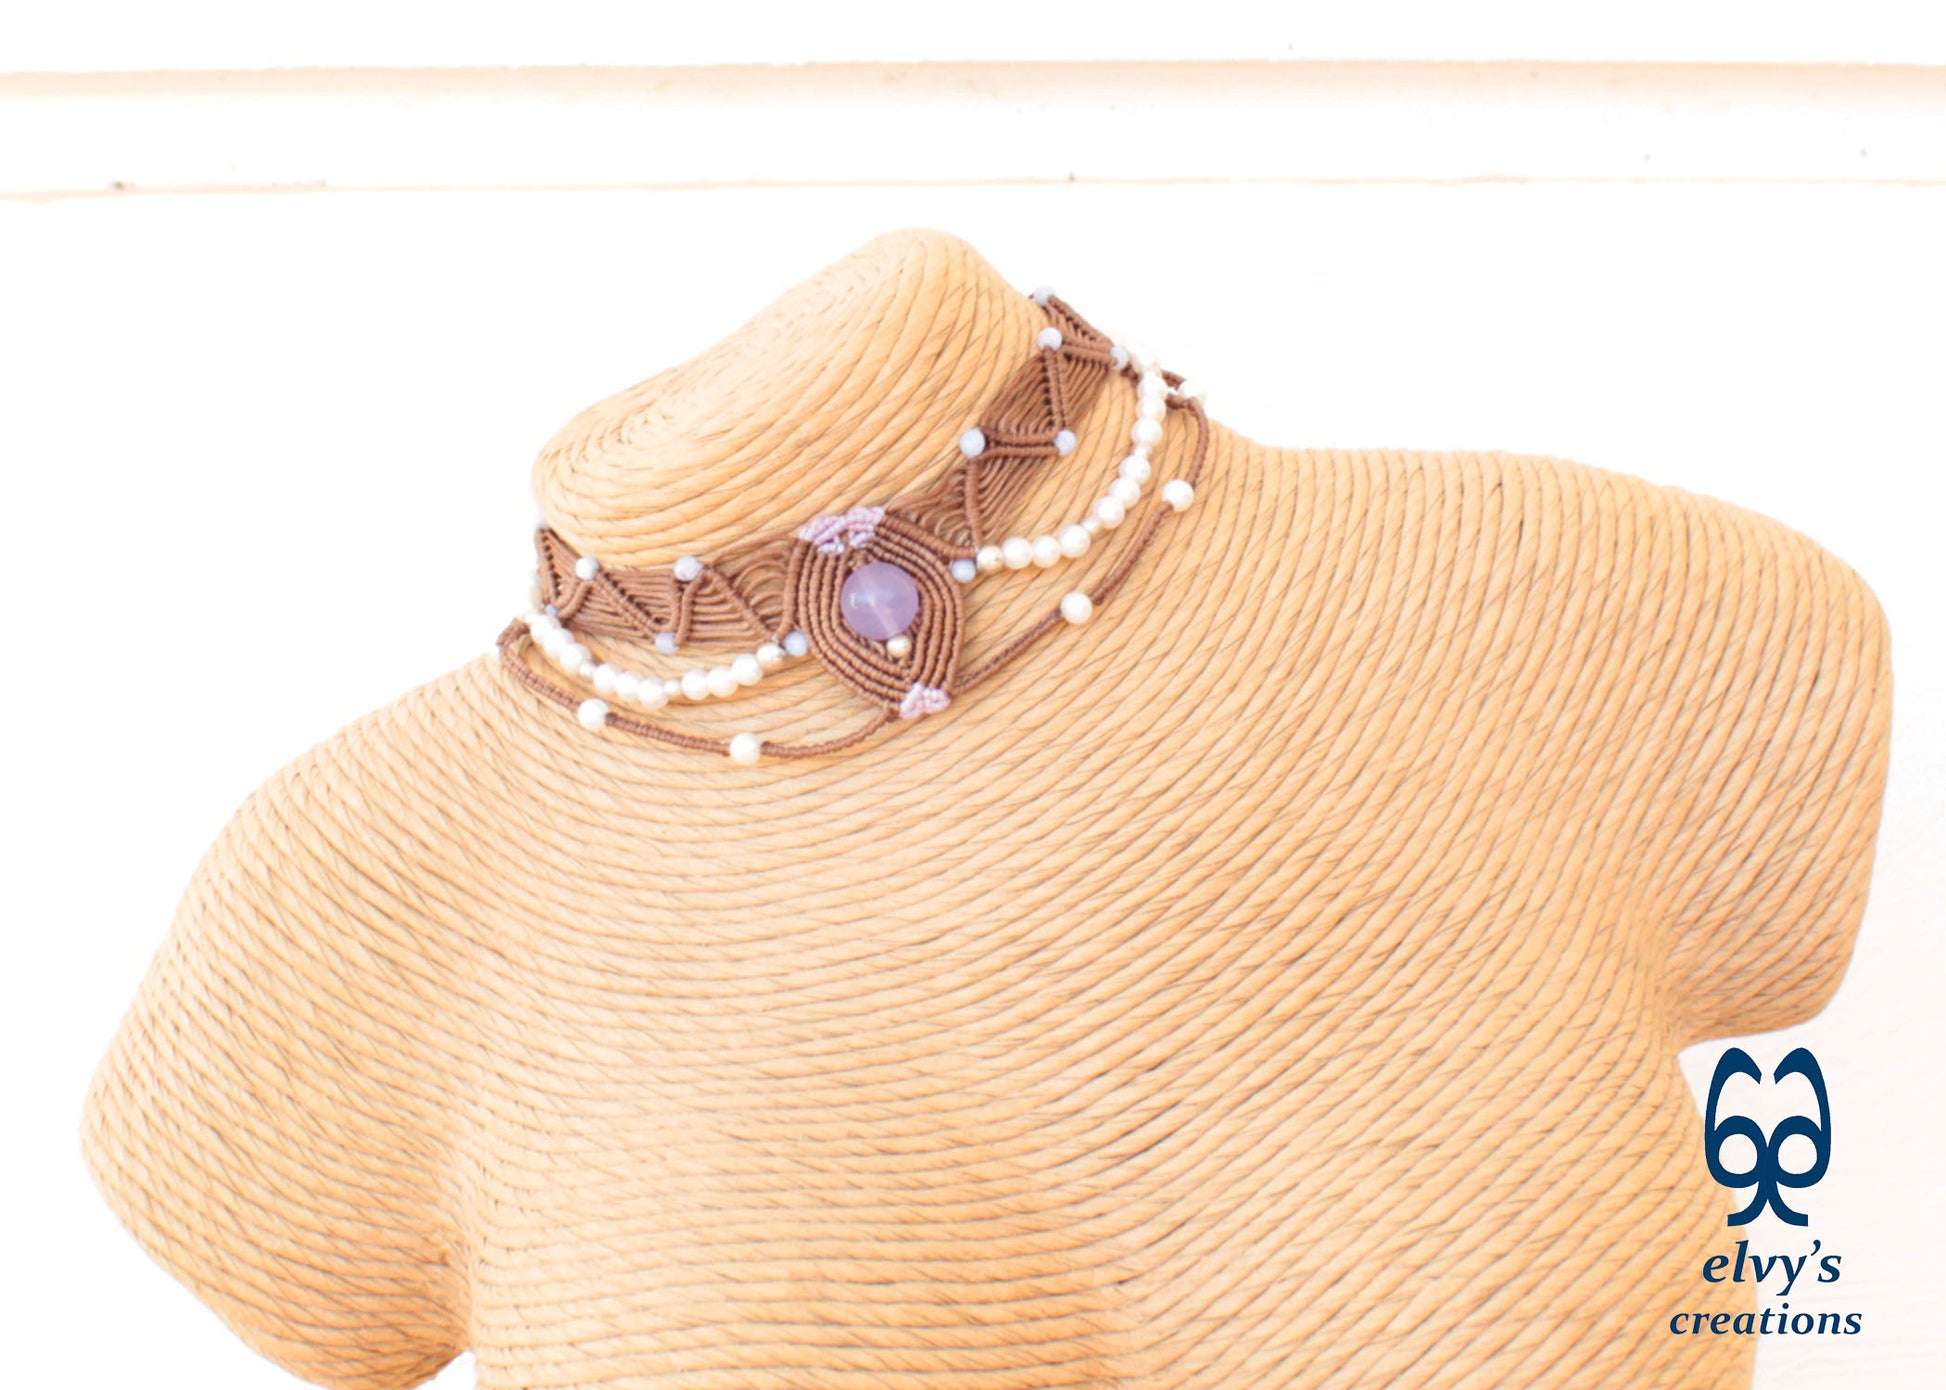 Handmade Brown Macrame Choker Necklace with Chalcedony and Pearls Adjustable Lace Necklace